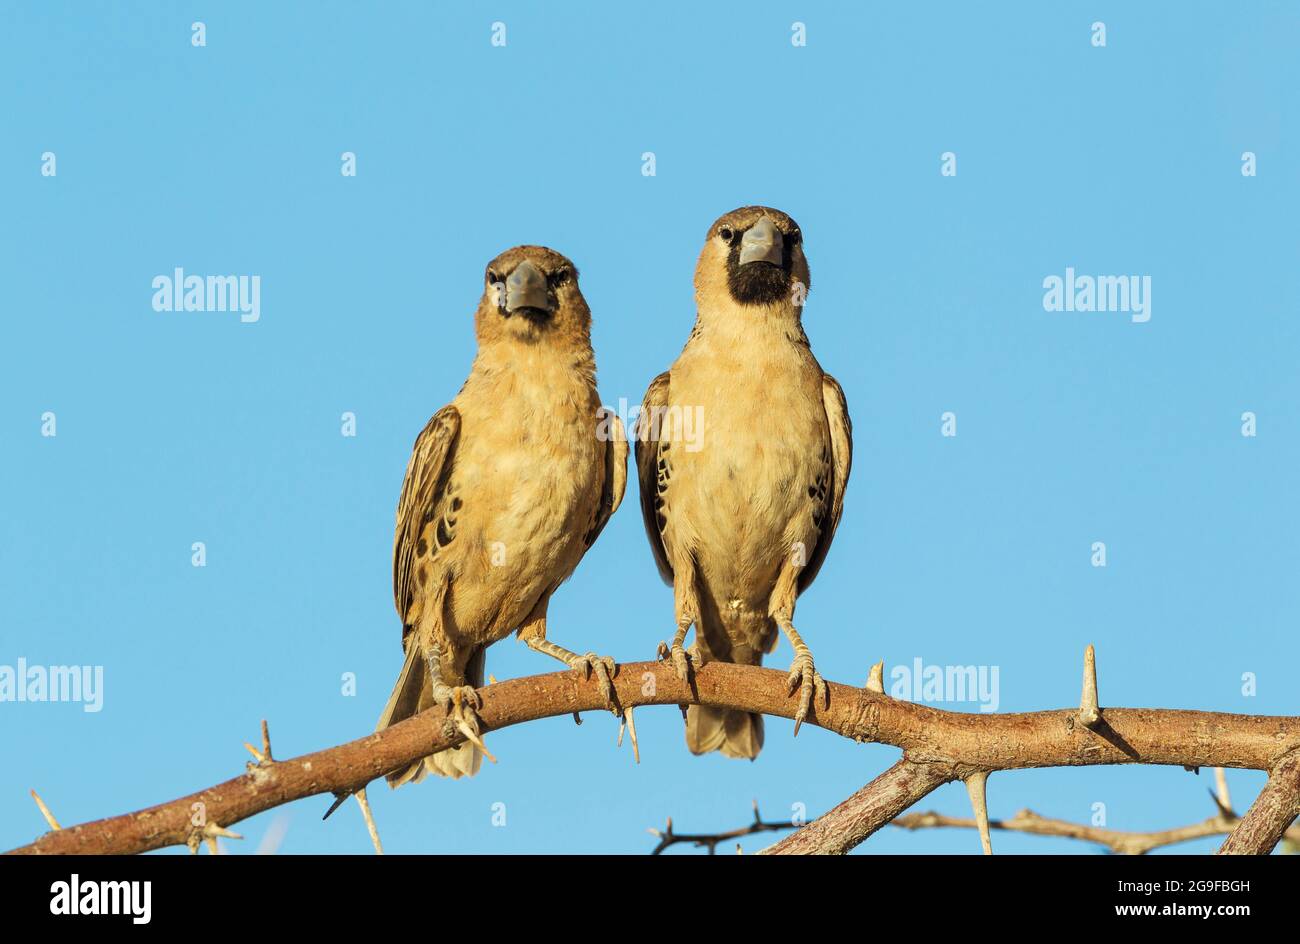 Sociable Weaver (Philetairus socius). Two adults perching in the vicinity of its nest. Kalahari Desert, Kgalagadi Transfrontier Park, South Africa. Stock Photo